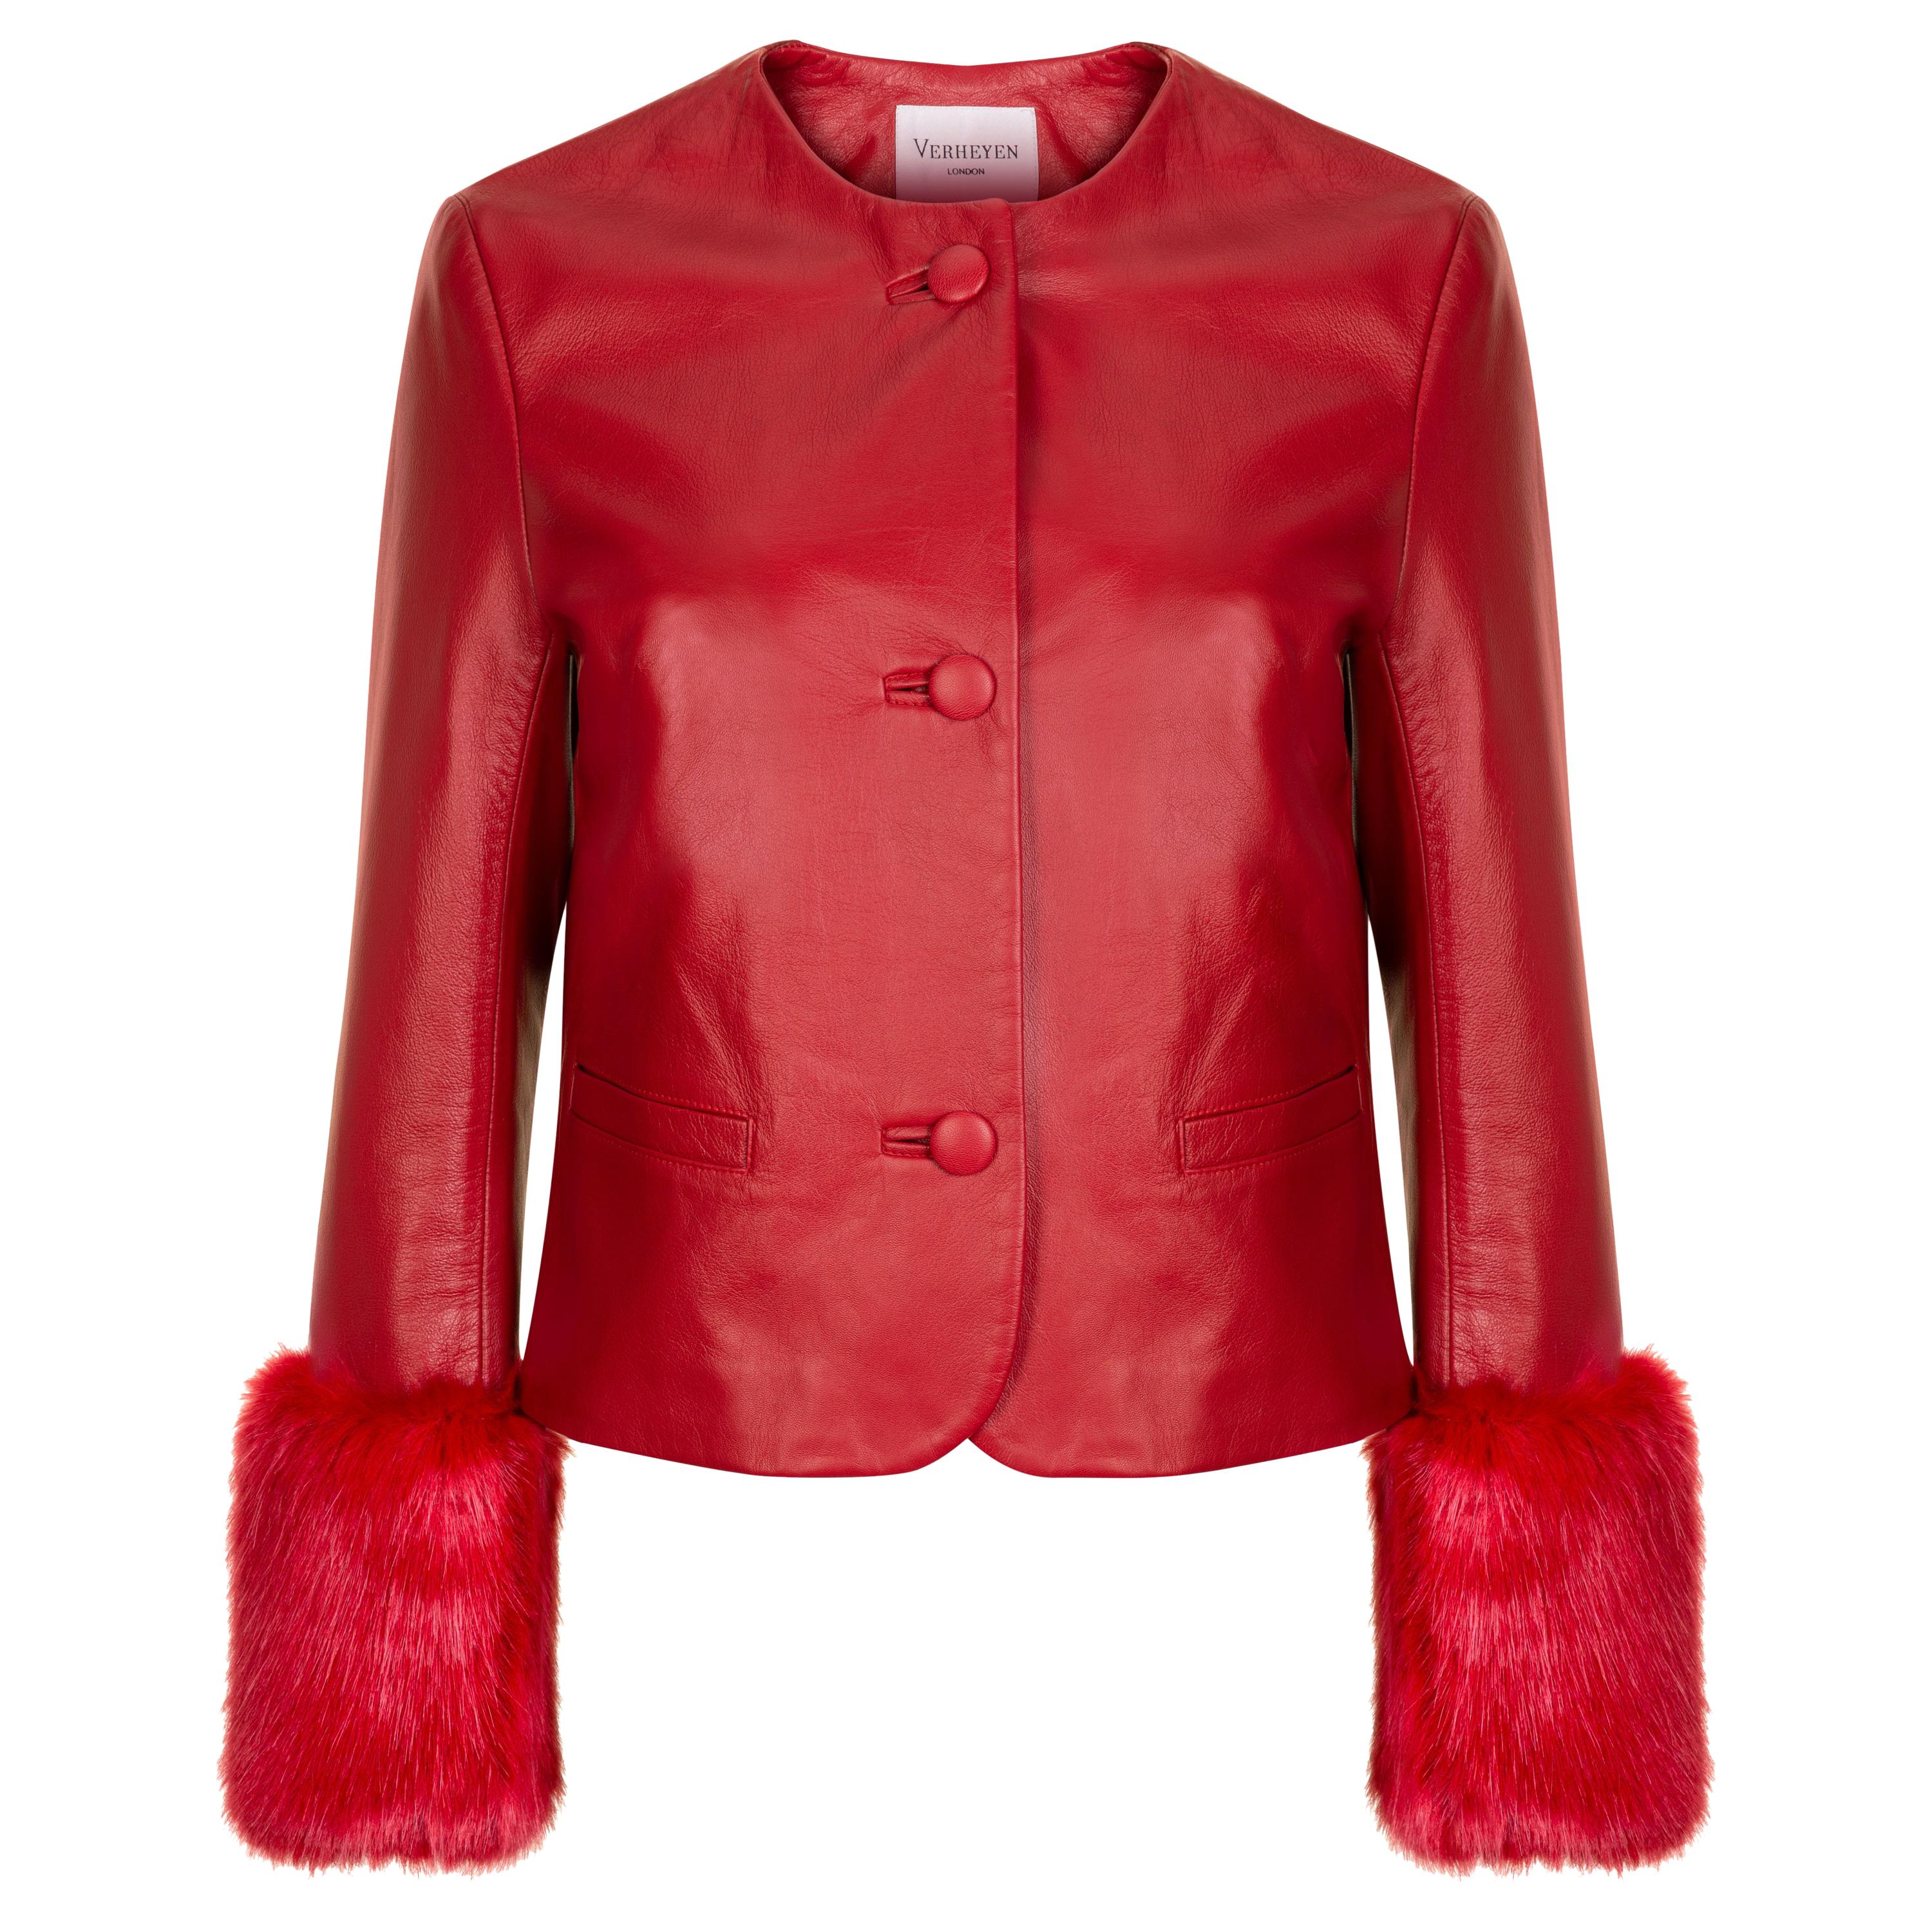 Verheyen Vita Cropped Jacket in Red Leather with Faux Fur - Size uk 6